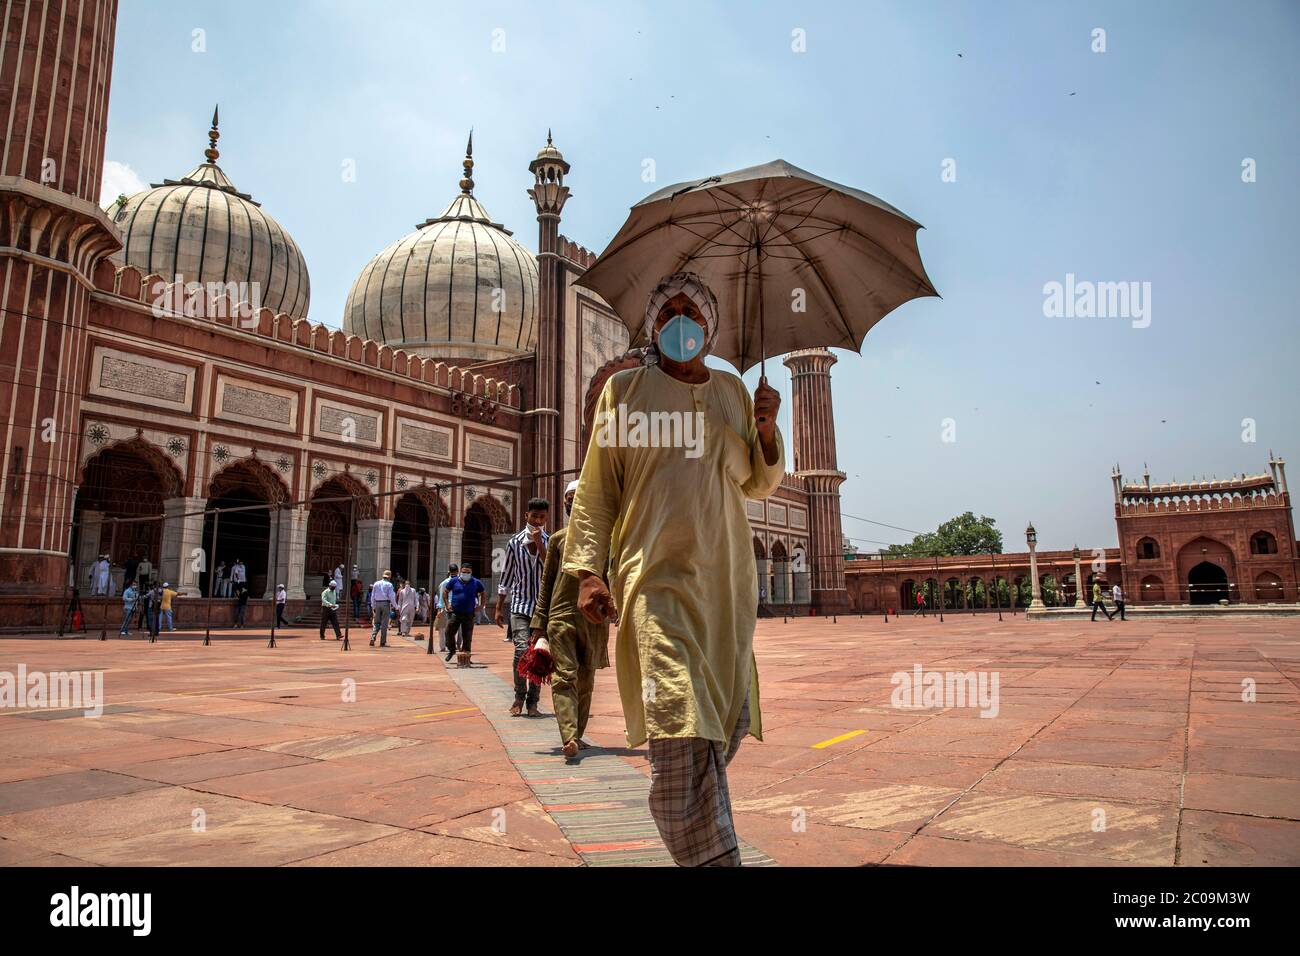 Muslims walk outside after prayers at Jama Masjid after the opening of most of the religious places as India eases lockdown restrictions that were imp Stock Photo